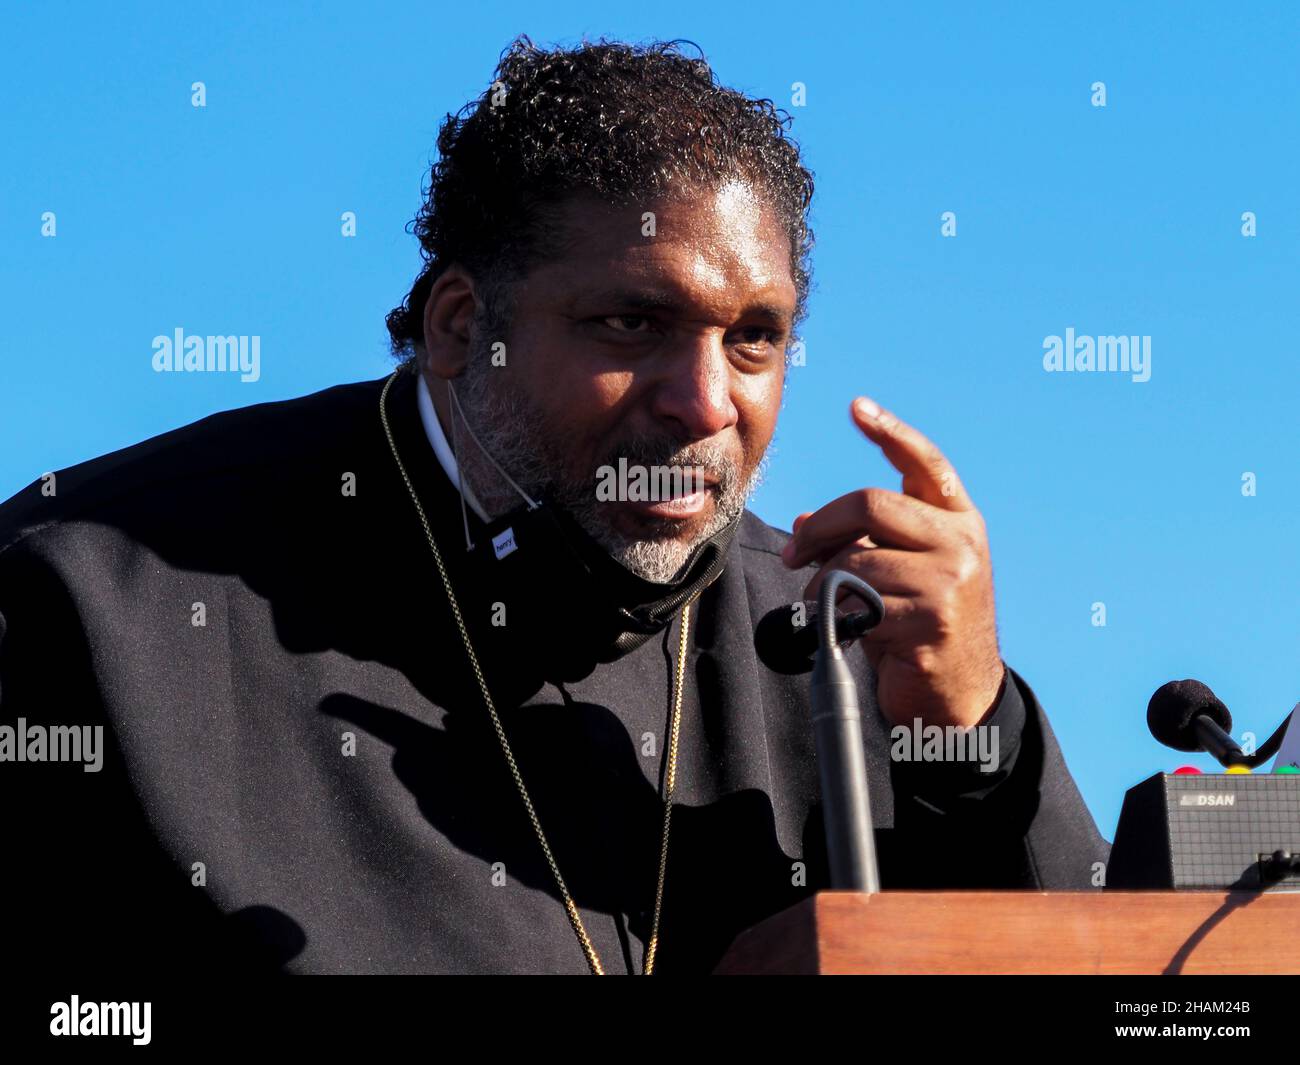 December 13, 2021, Washington, District of Columbia, USA: At the 'Get it Done in 2021' rally, the Reverend Dr. William J. Barber II, co-chair of the Poor PeopleÃs Campaign, called for the Senate to stop stonewalling and pass voting rights protections and the Build Back Better plan before the end of December. (Credit Image: © Sue Dorfman/ZUMA Press Wire) Stock Photo